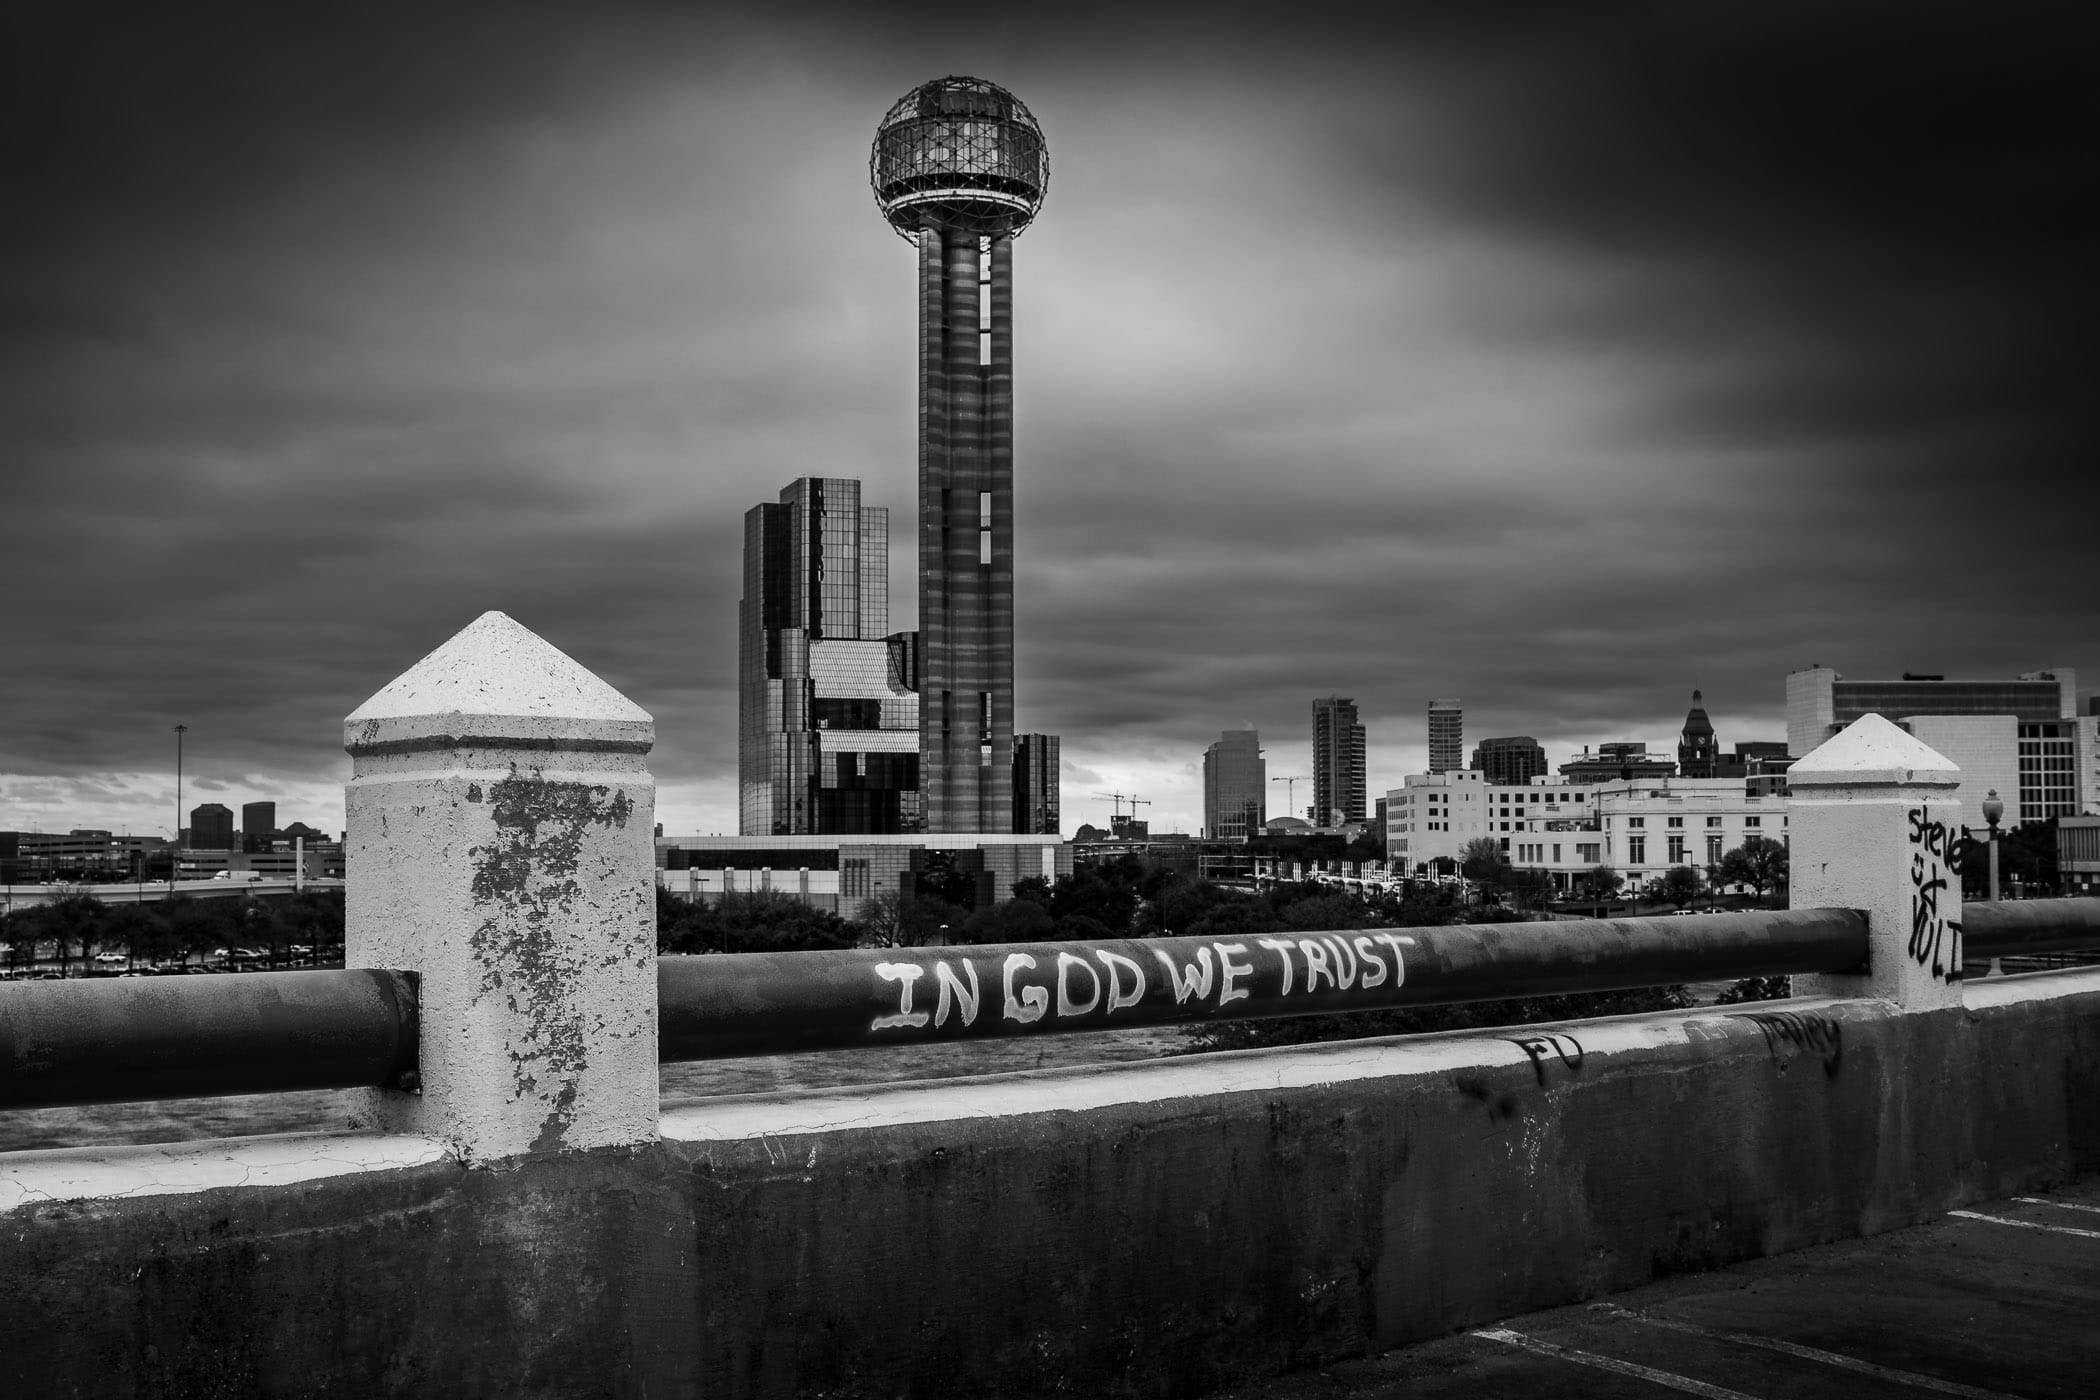 Dallas' Reunion Tower, as seen from a nearby abandoned parking garage.